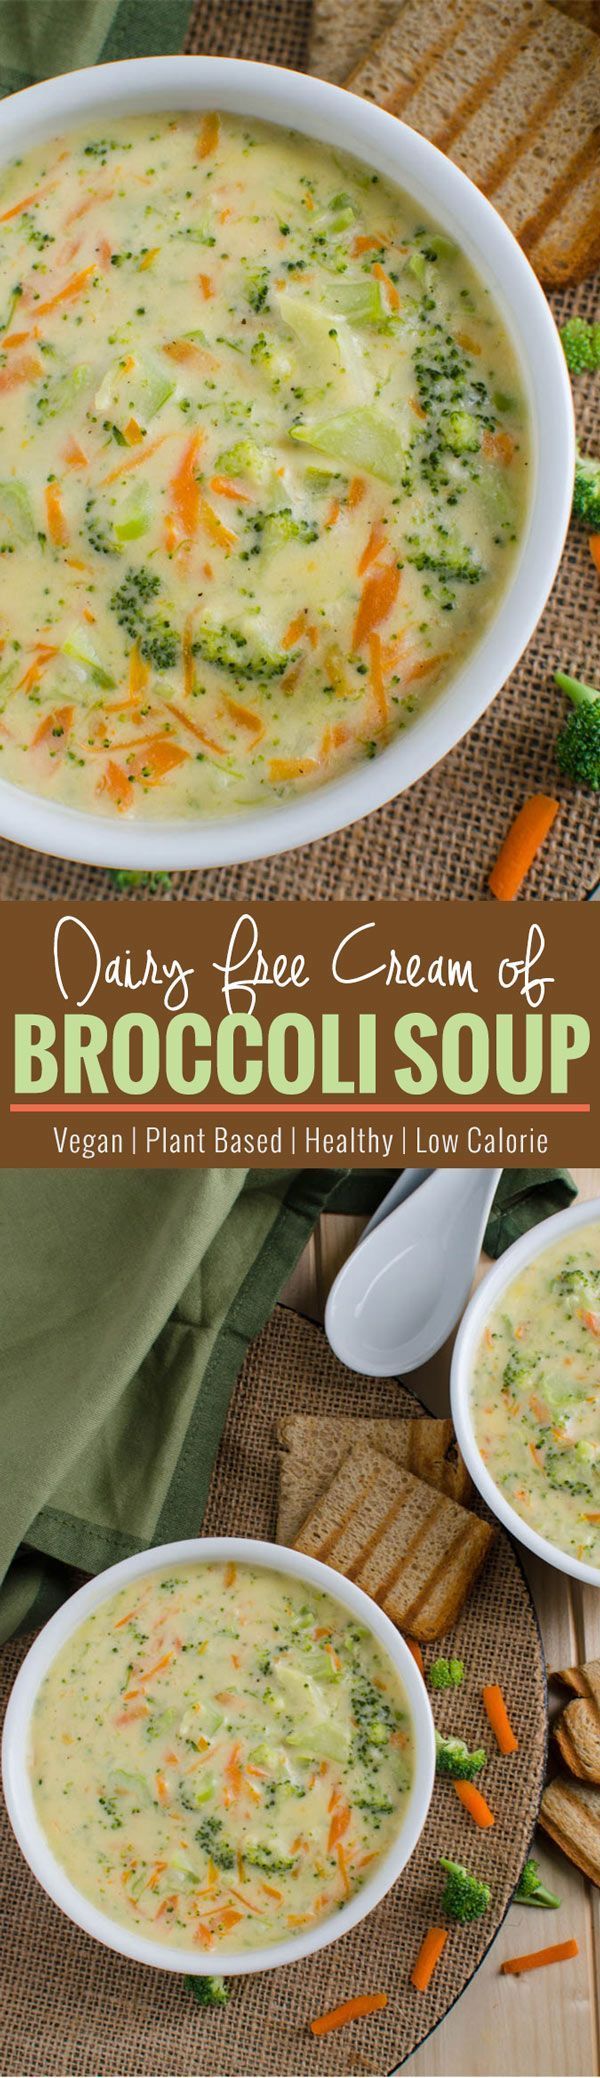 Healthy broccoli soup – prepared using all healthy & clean ingredients. It is also vegan, plant based and a low calorie soup. |